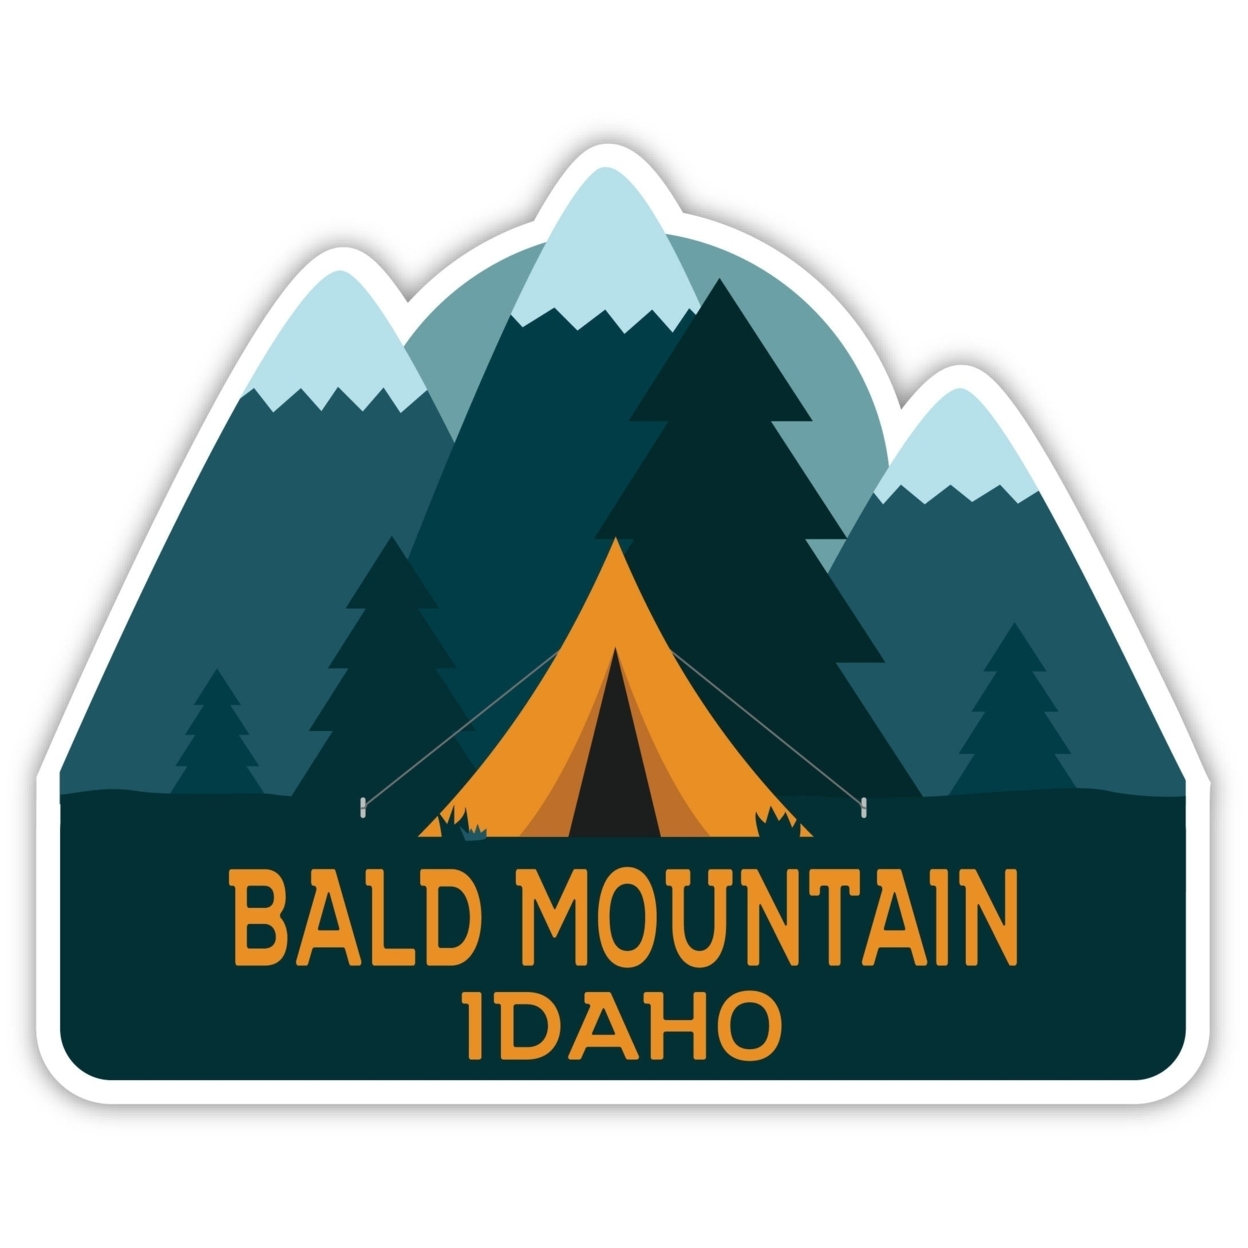 Bald Mountain Idaho Souvenir Decorative Stickers (Choose Theme And Size) - 4-Pack, 6-Inch, Tent